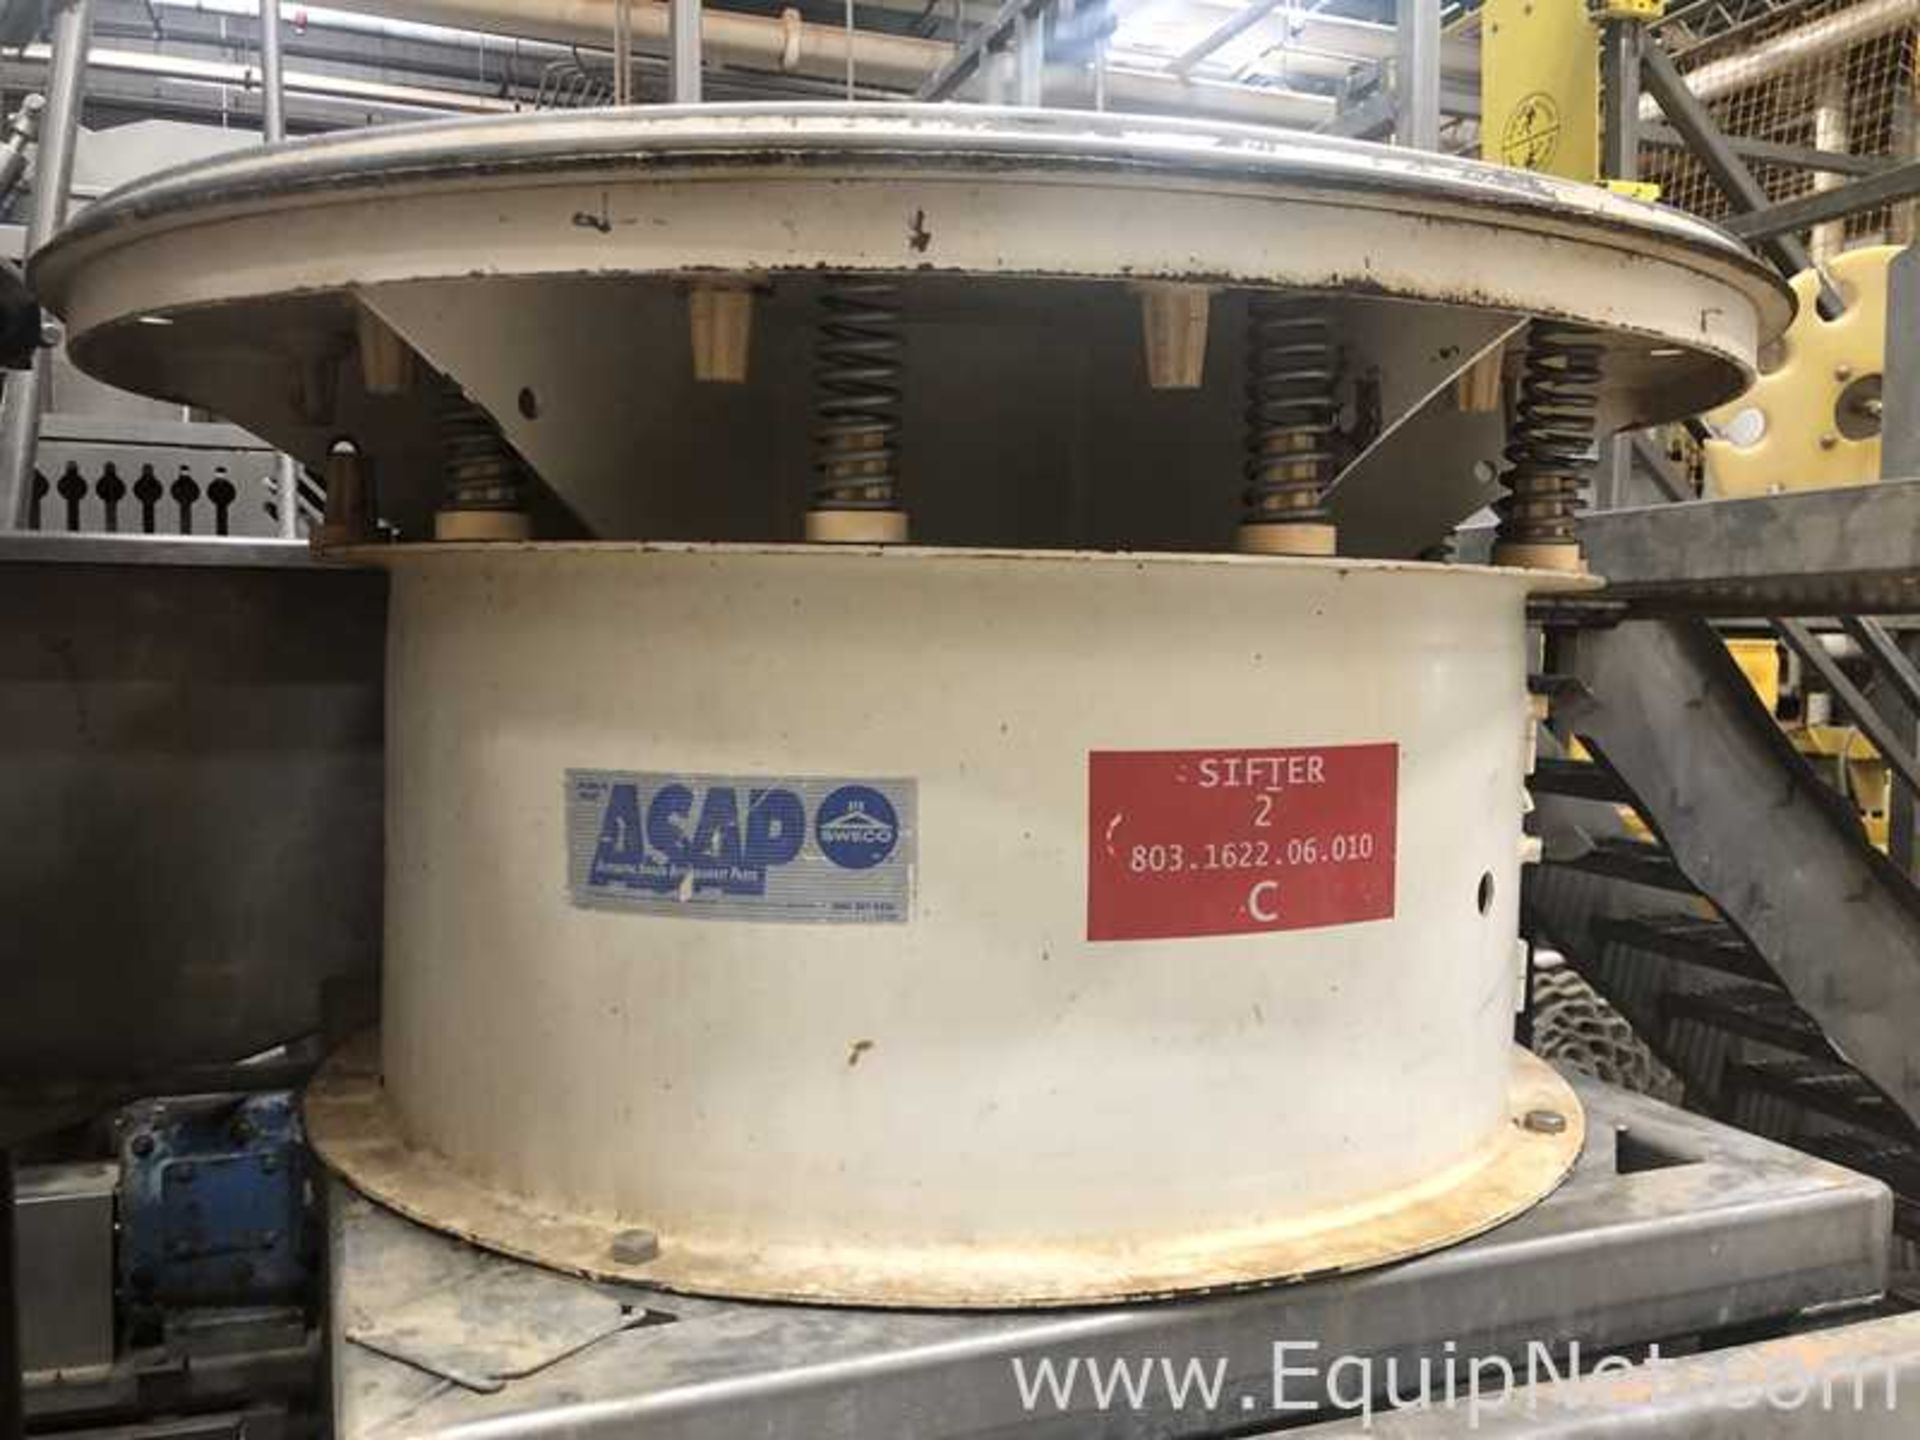 Lot Of Two 48 Inch Sweco Round Separator Sifter Screeners Model XS48S888TLWC - Image 12 of 13